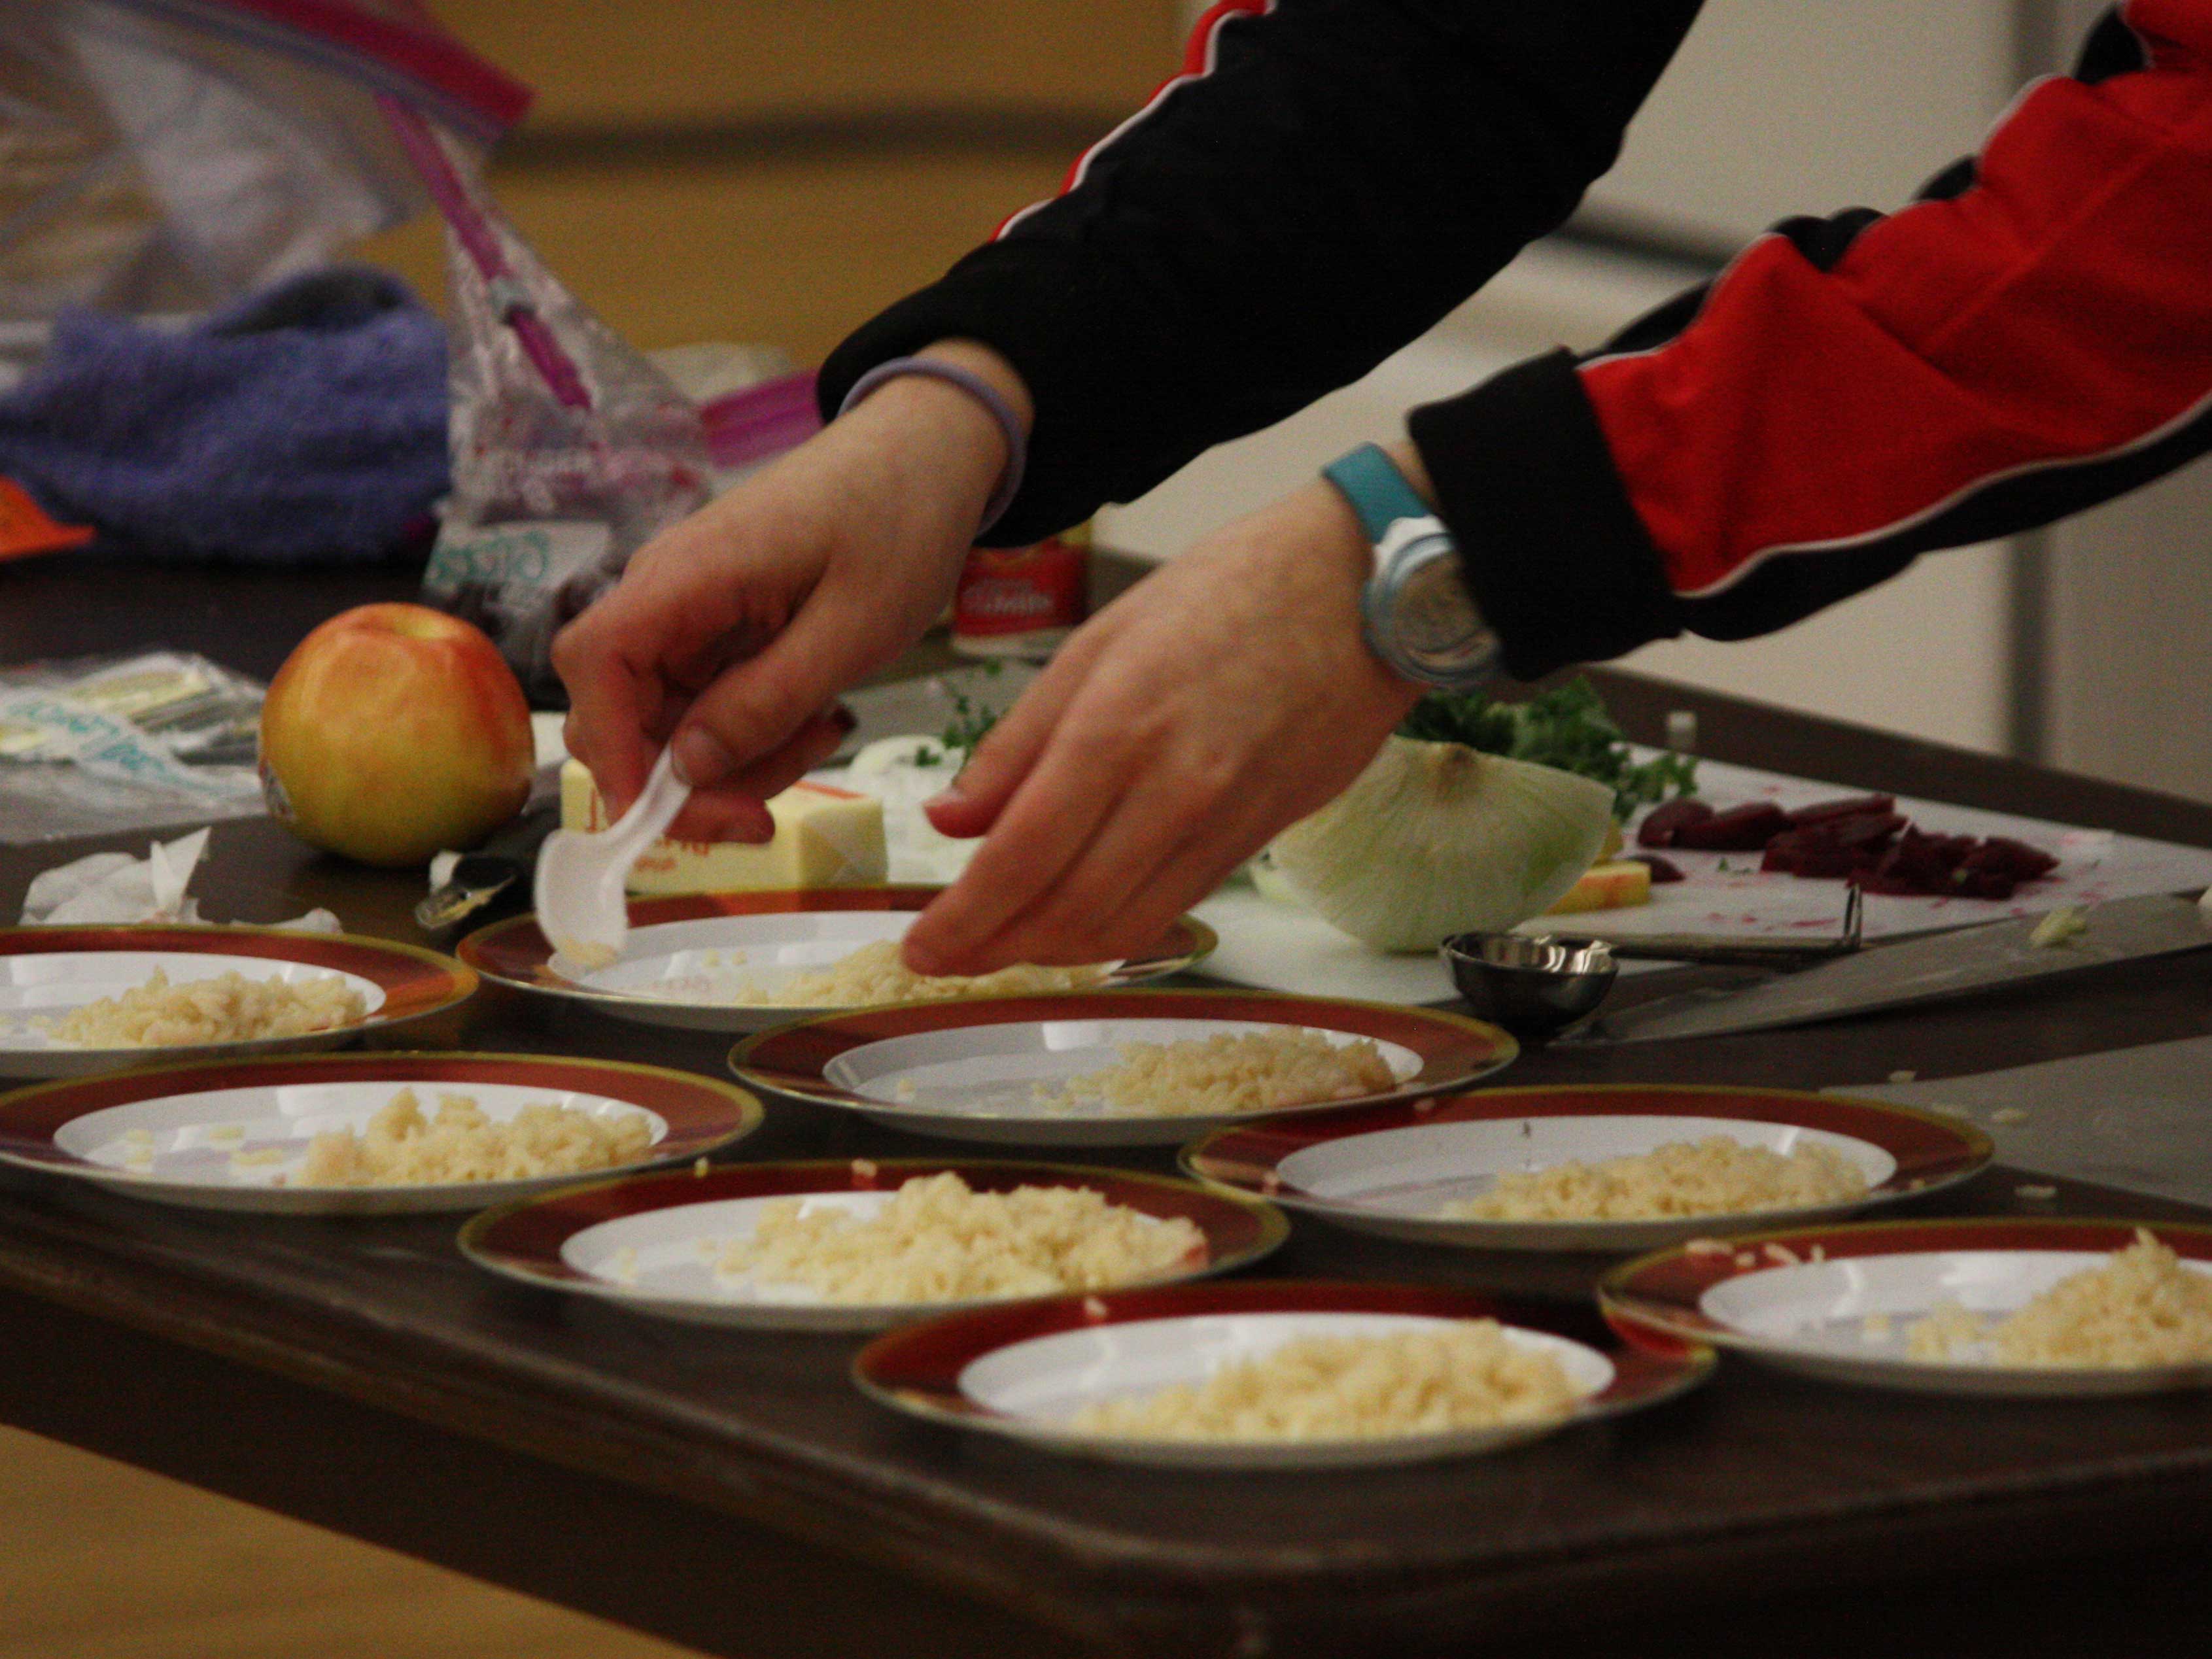 Teams were provided specific ingredients to create their creative culinary masterpieces.